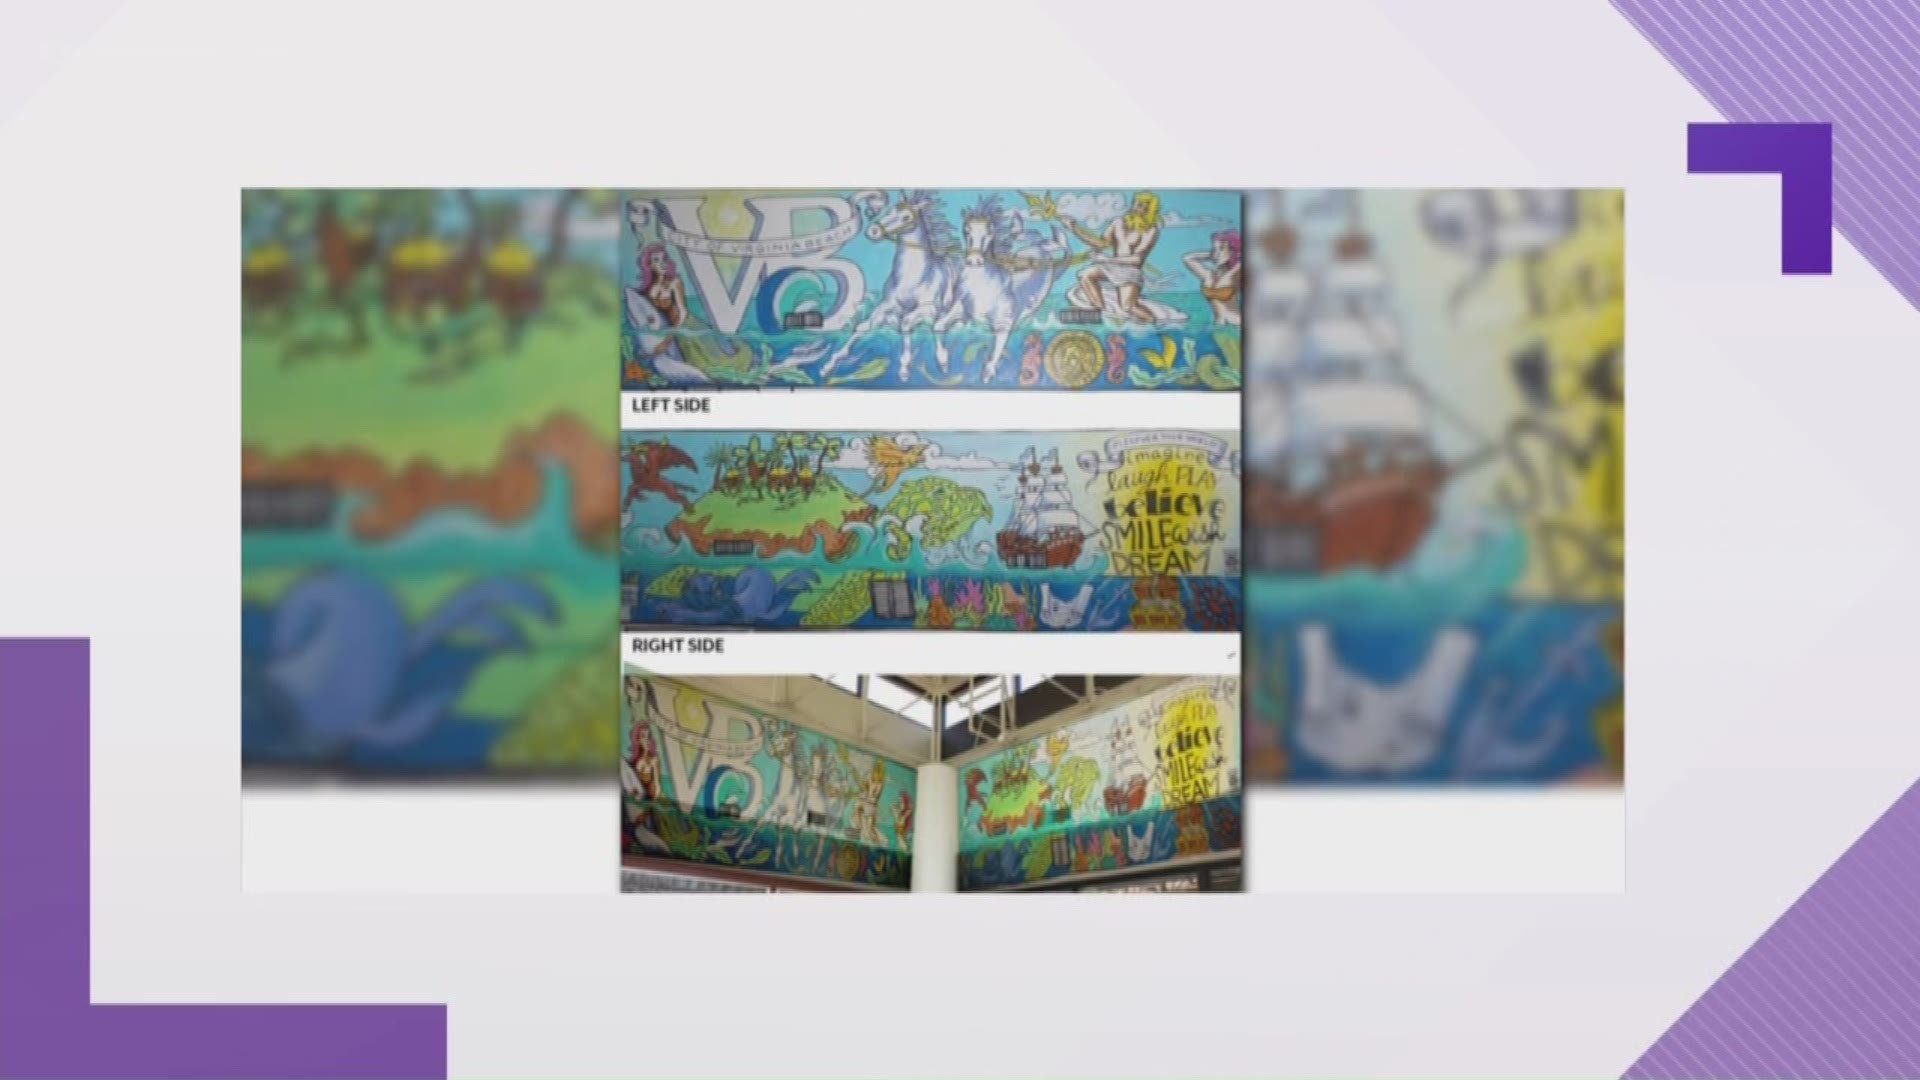 The artists have been announced for the murals to go up around Virginia Beach.